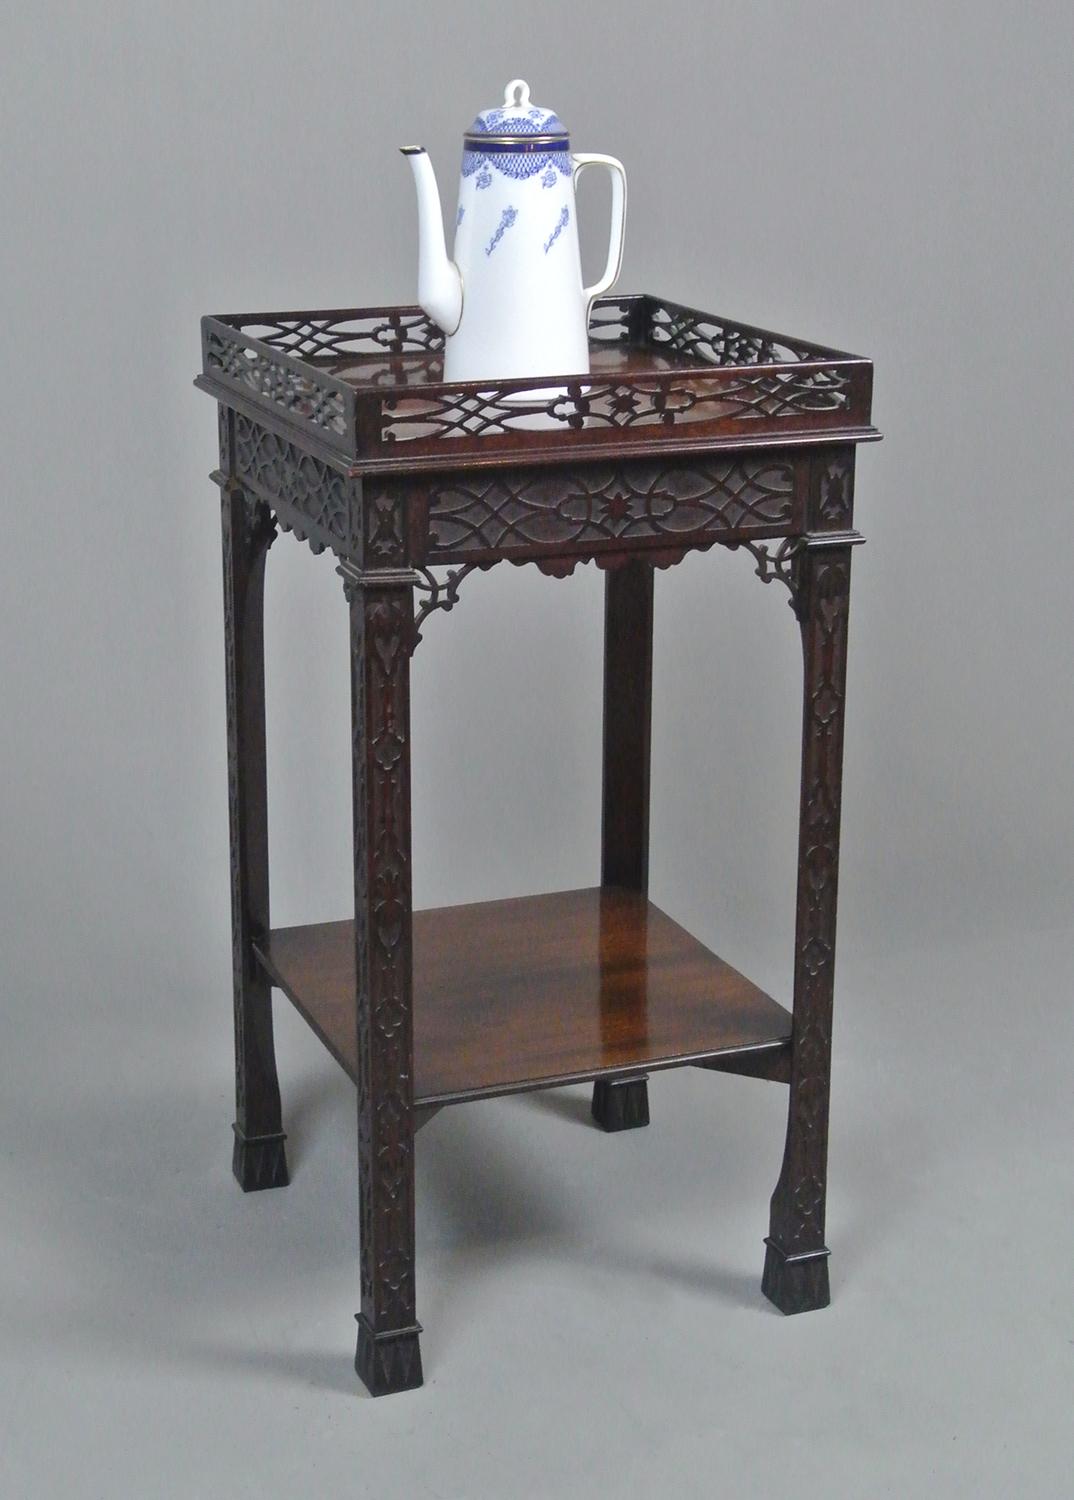 A wonderful early 19th century mahogany tea kettle stand with beautiful blind fretwork carved legs and a pierced fine fretwork gallery and spandrels in the Chinese Chippendale manner.

With a beautiful and rich colour and with a single board of